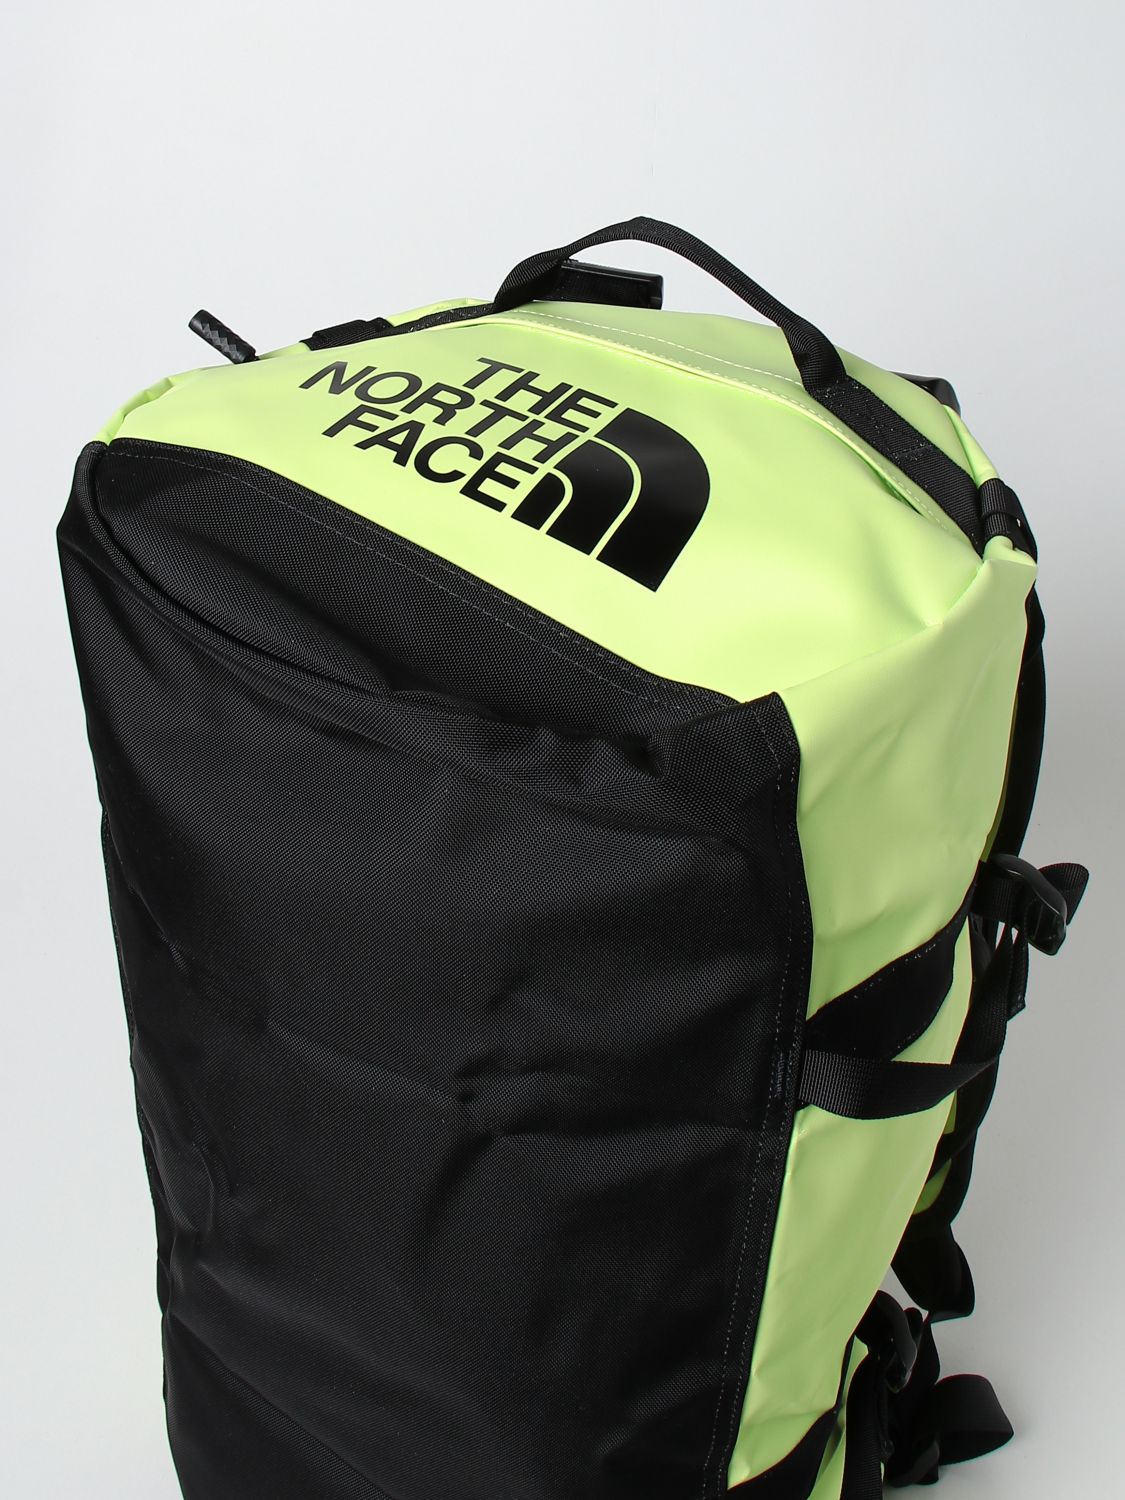 Backpack The North Face: The North Face Base Camp Duffel S backpack in technical fabric green 3